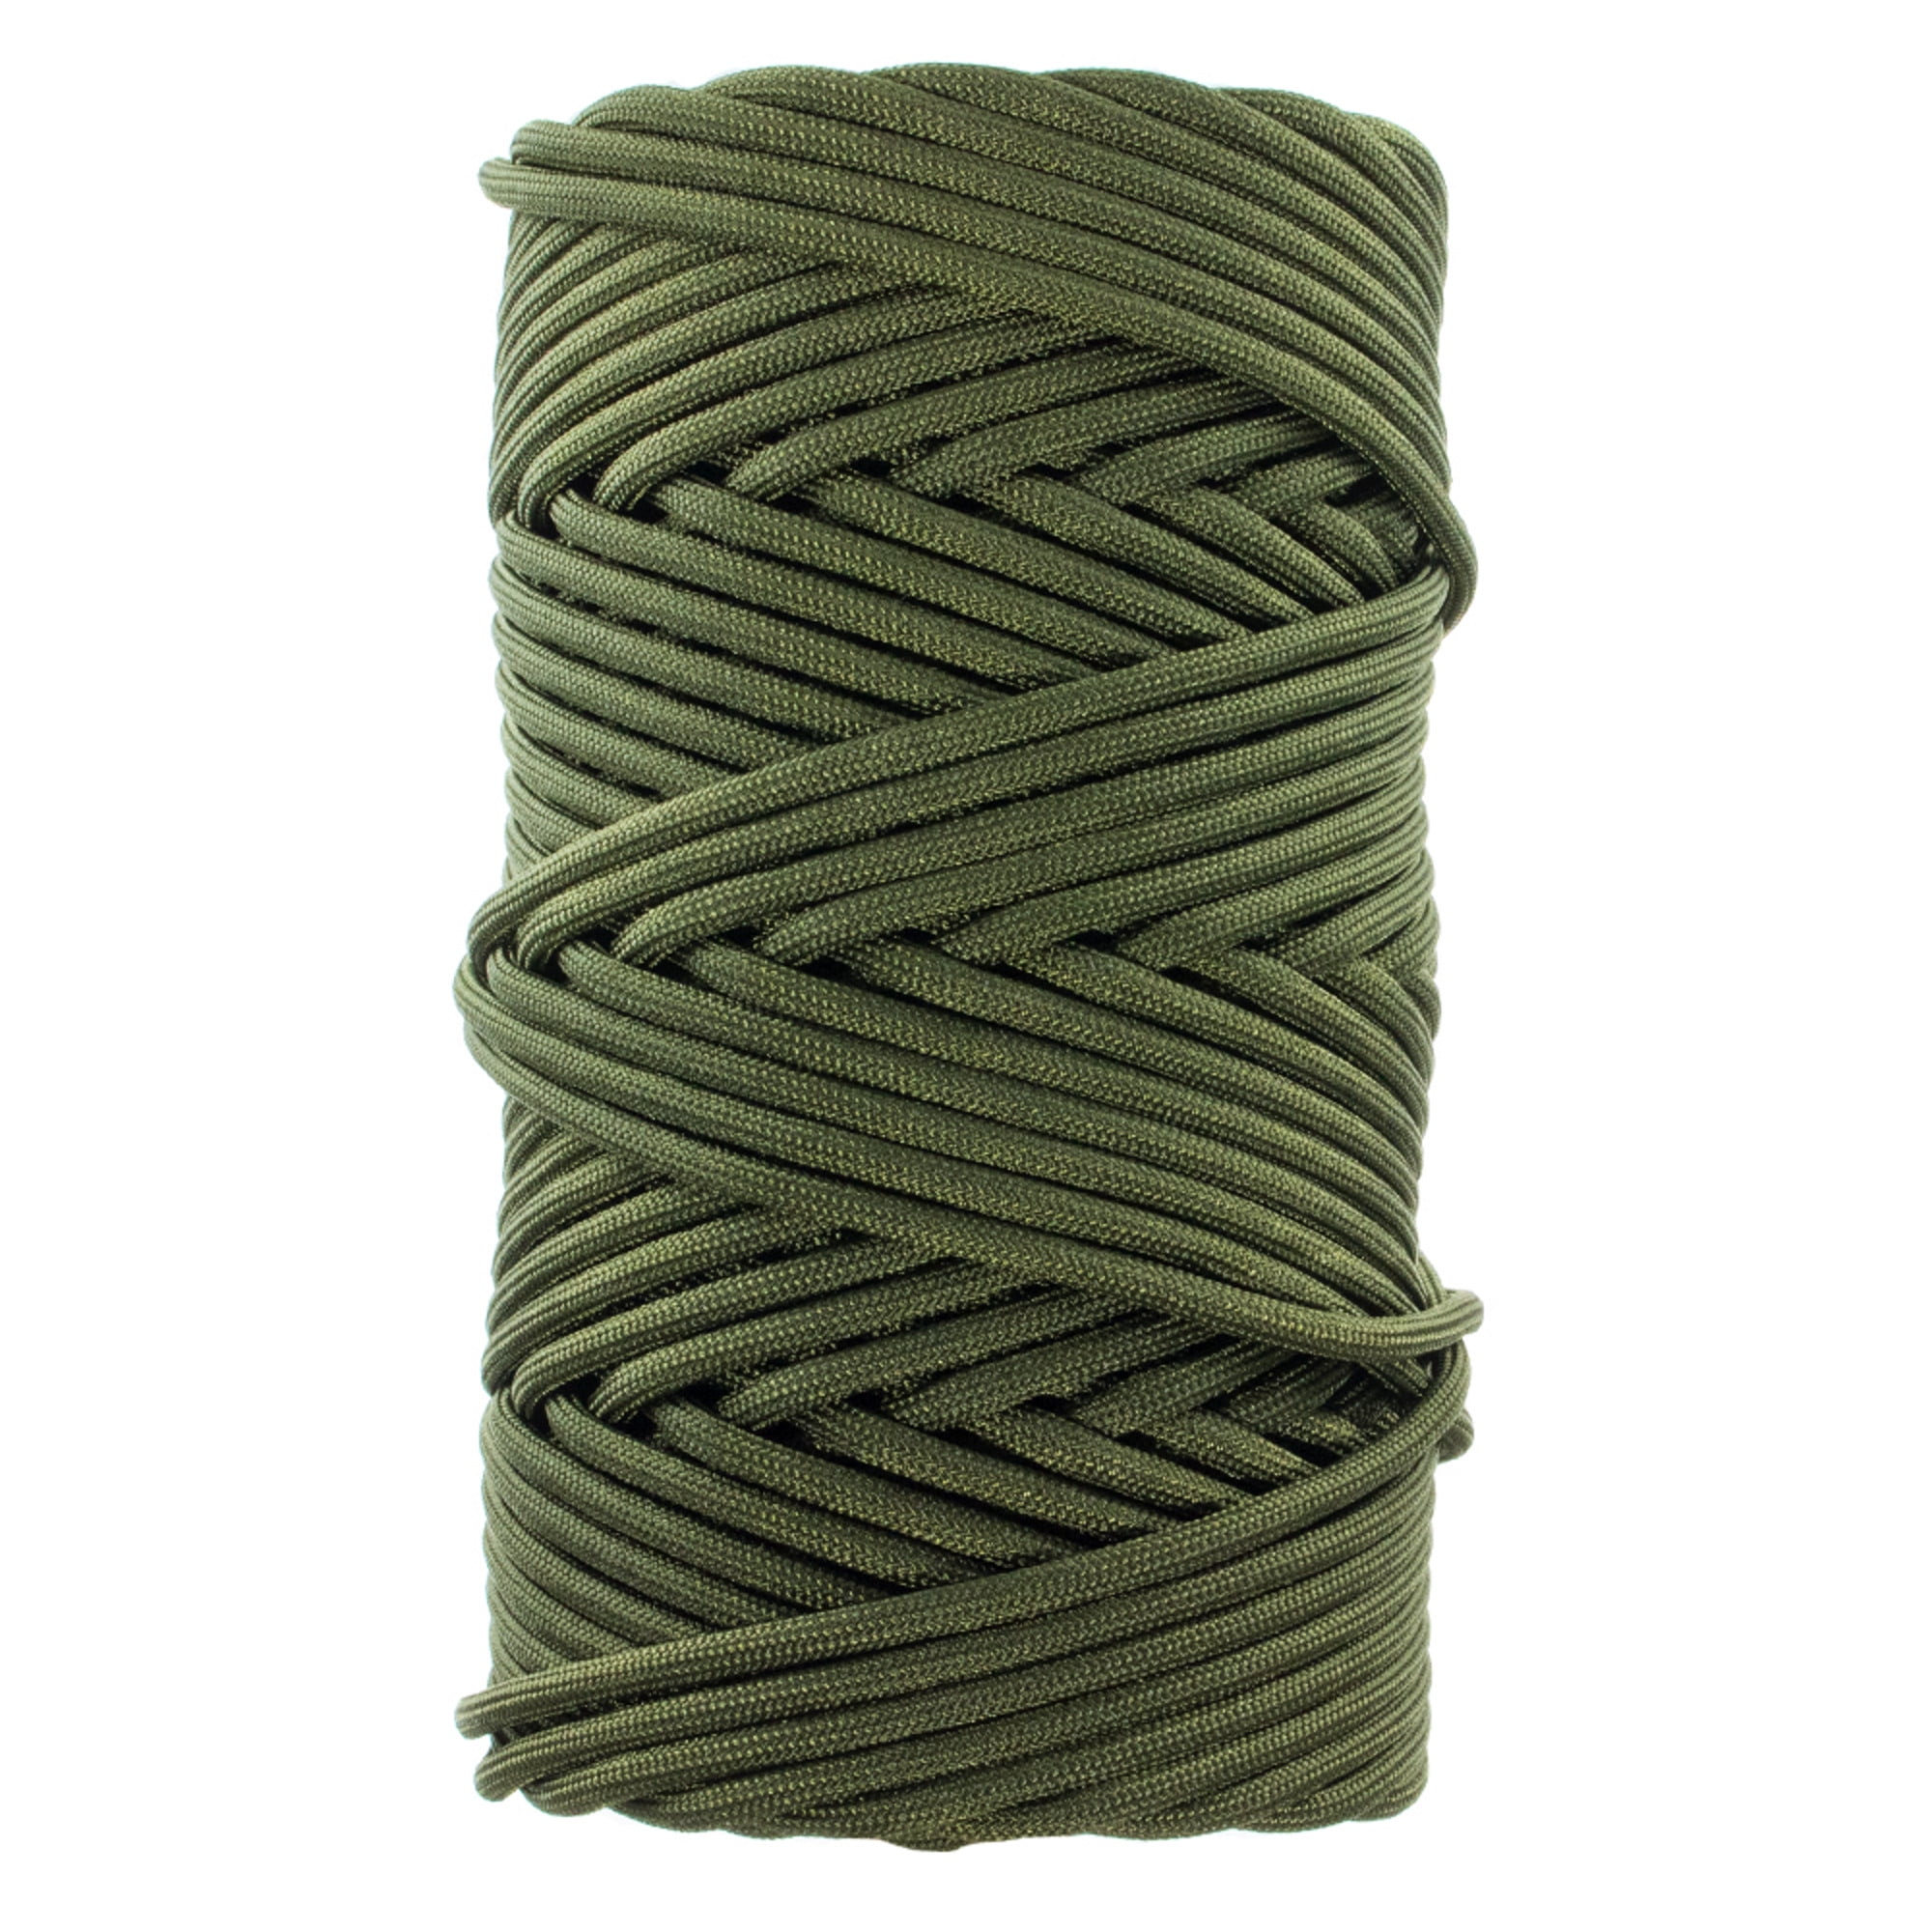 100FT, Acid Purple Hiking and Survival WEREWOLVES 550lb Paracord /Parachute Cord 7 Strand Core Paracord Rope Type III Parachute Cord 100' Paracord for Camping 200' 